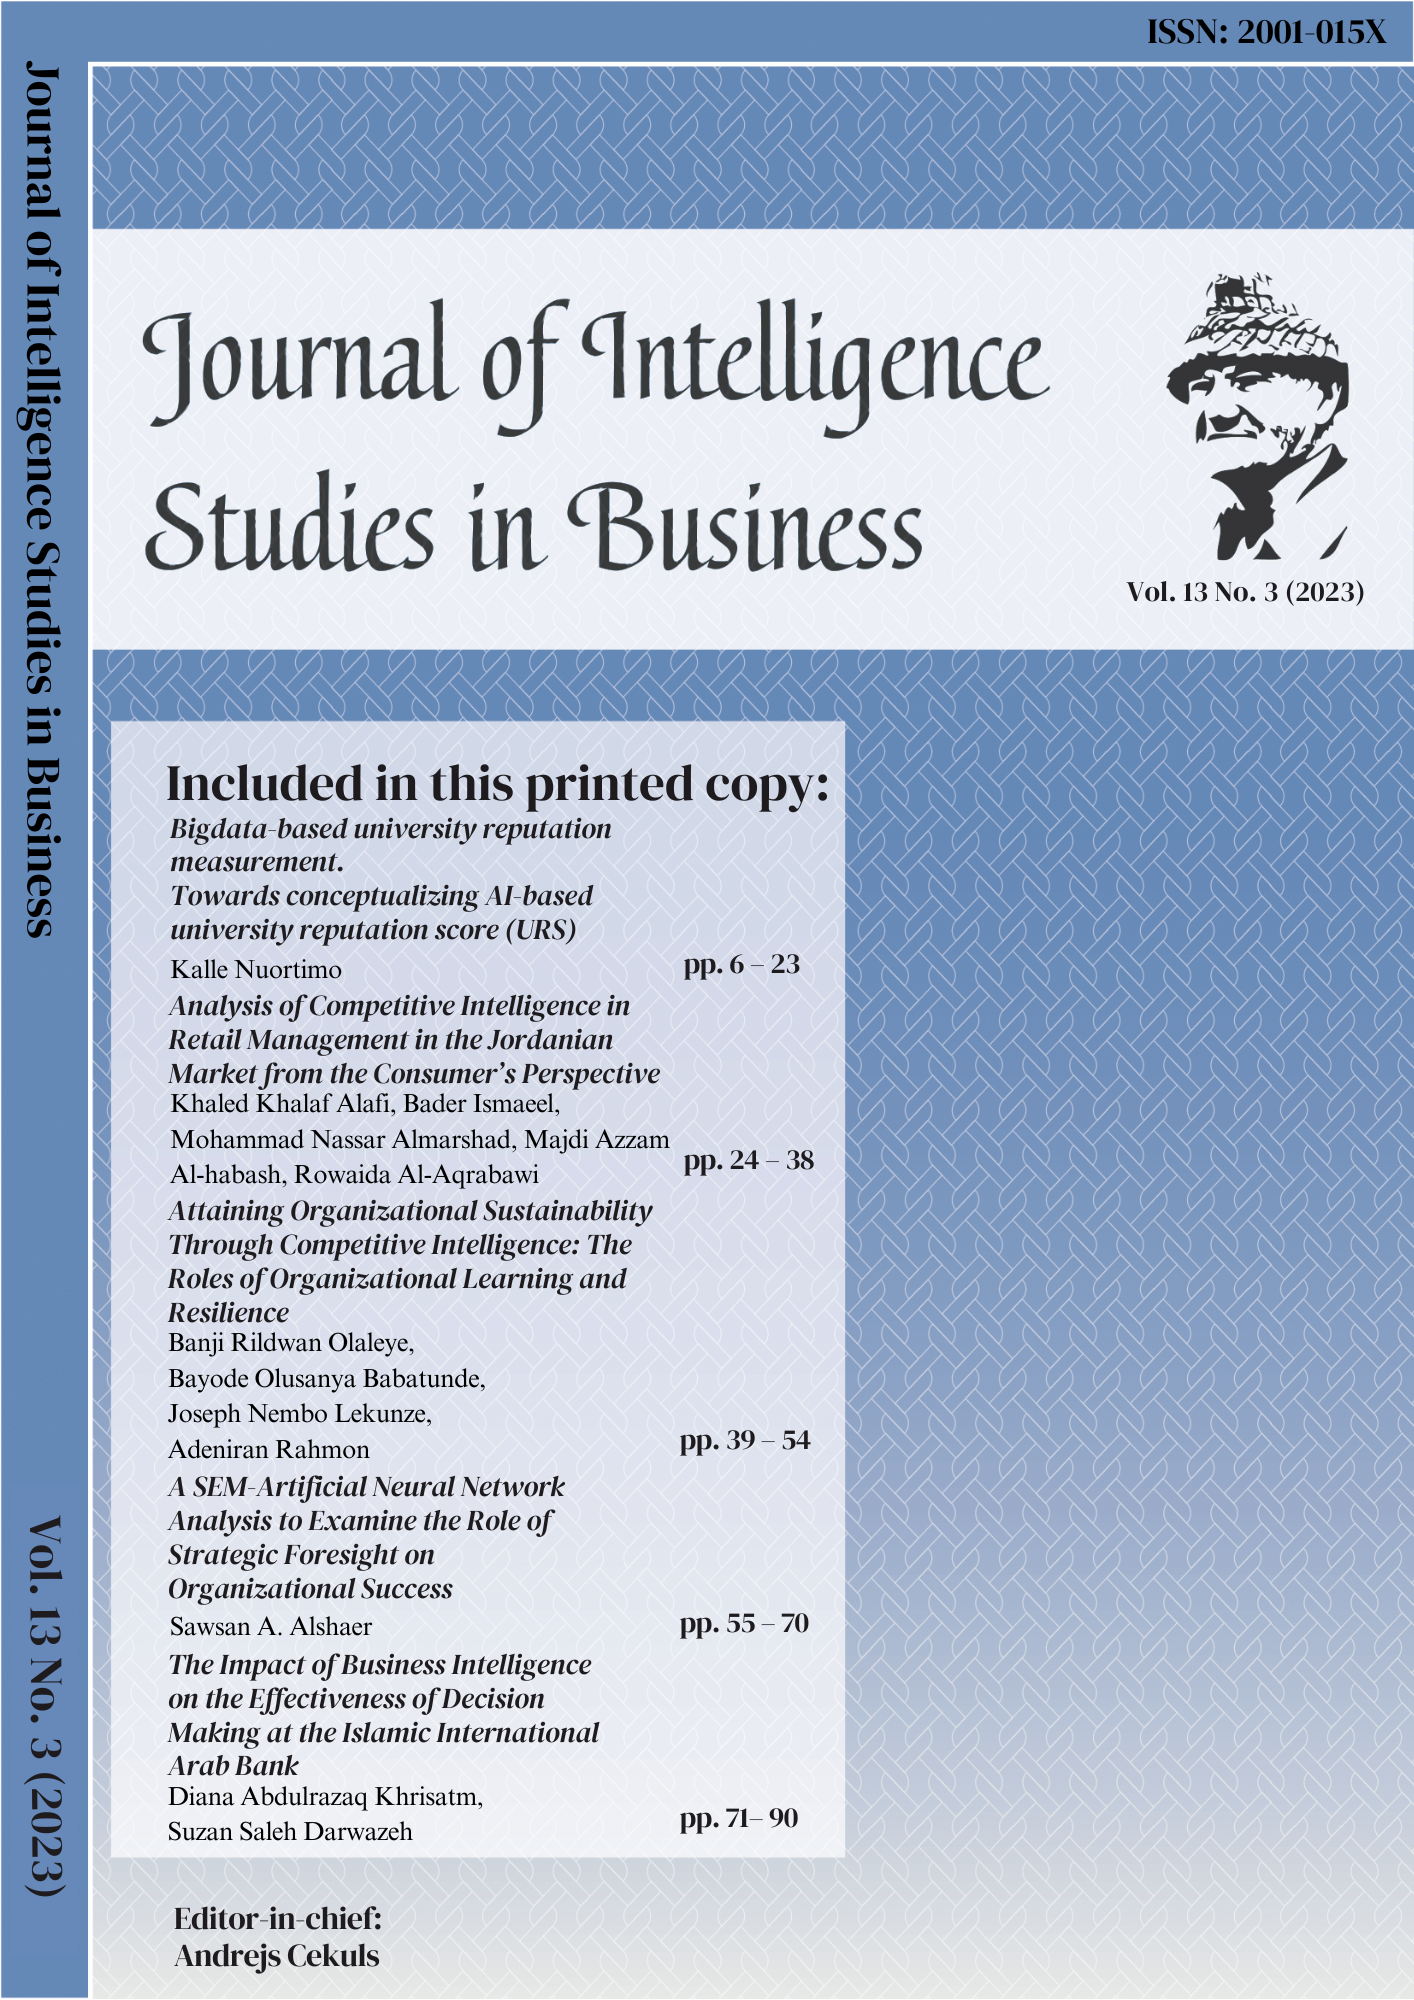 					View Vol. 13 No. 3 (2023): Journal of Intelligence Studies in Business
				